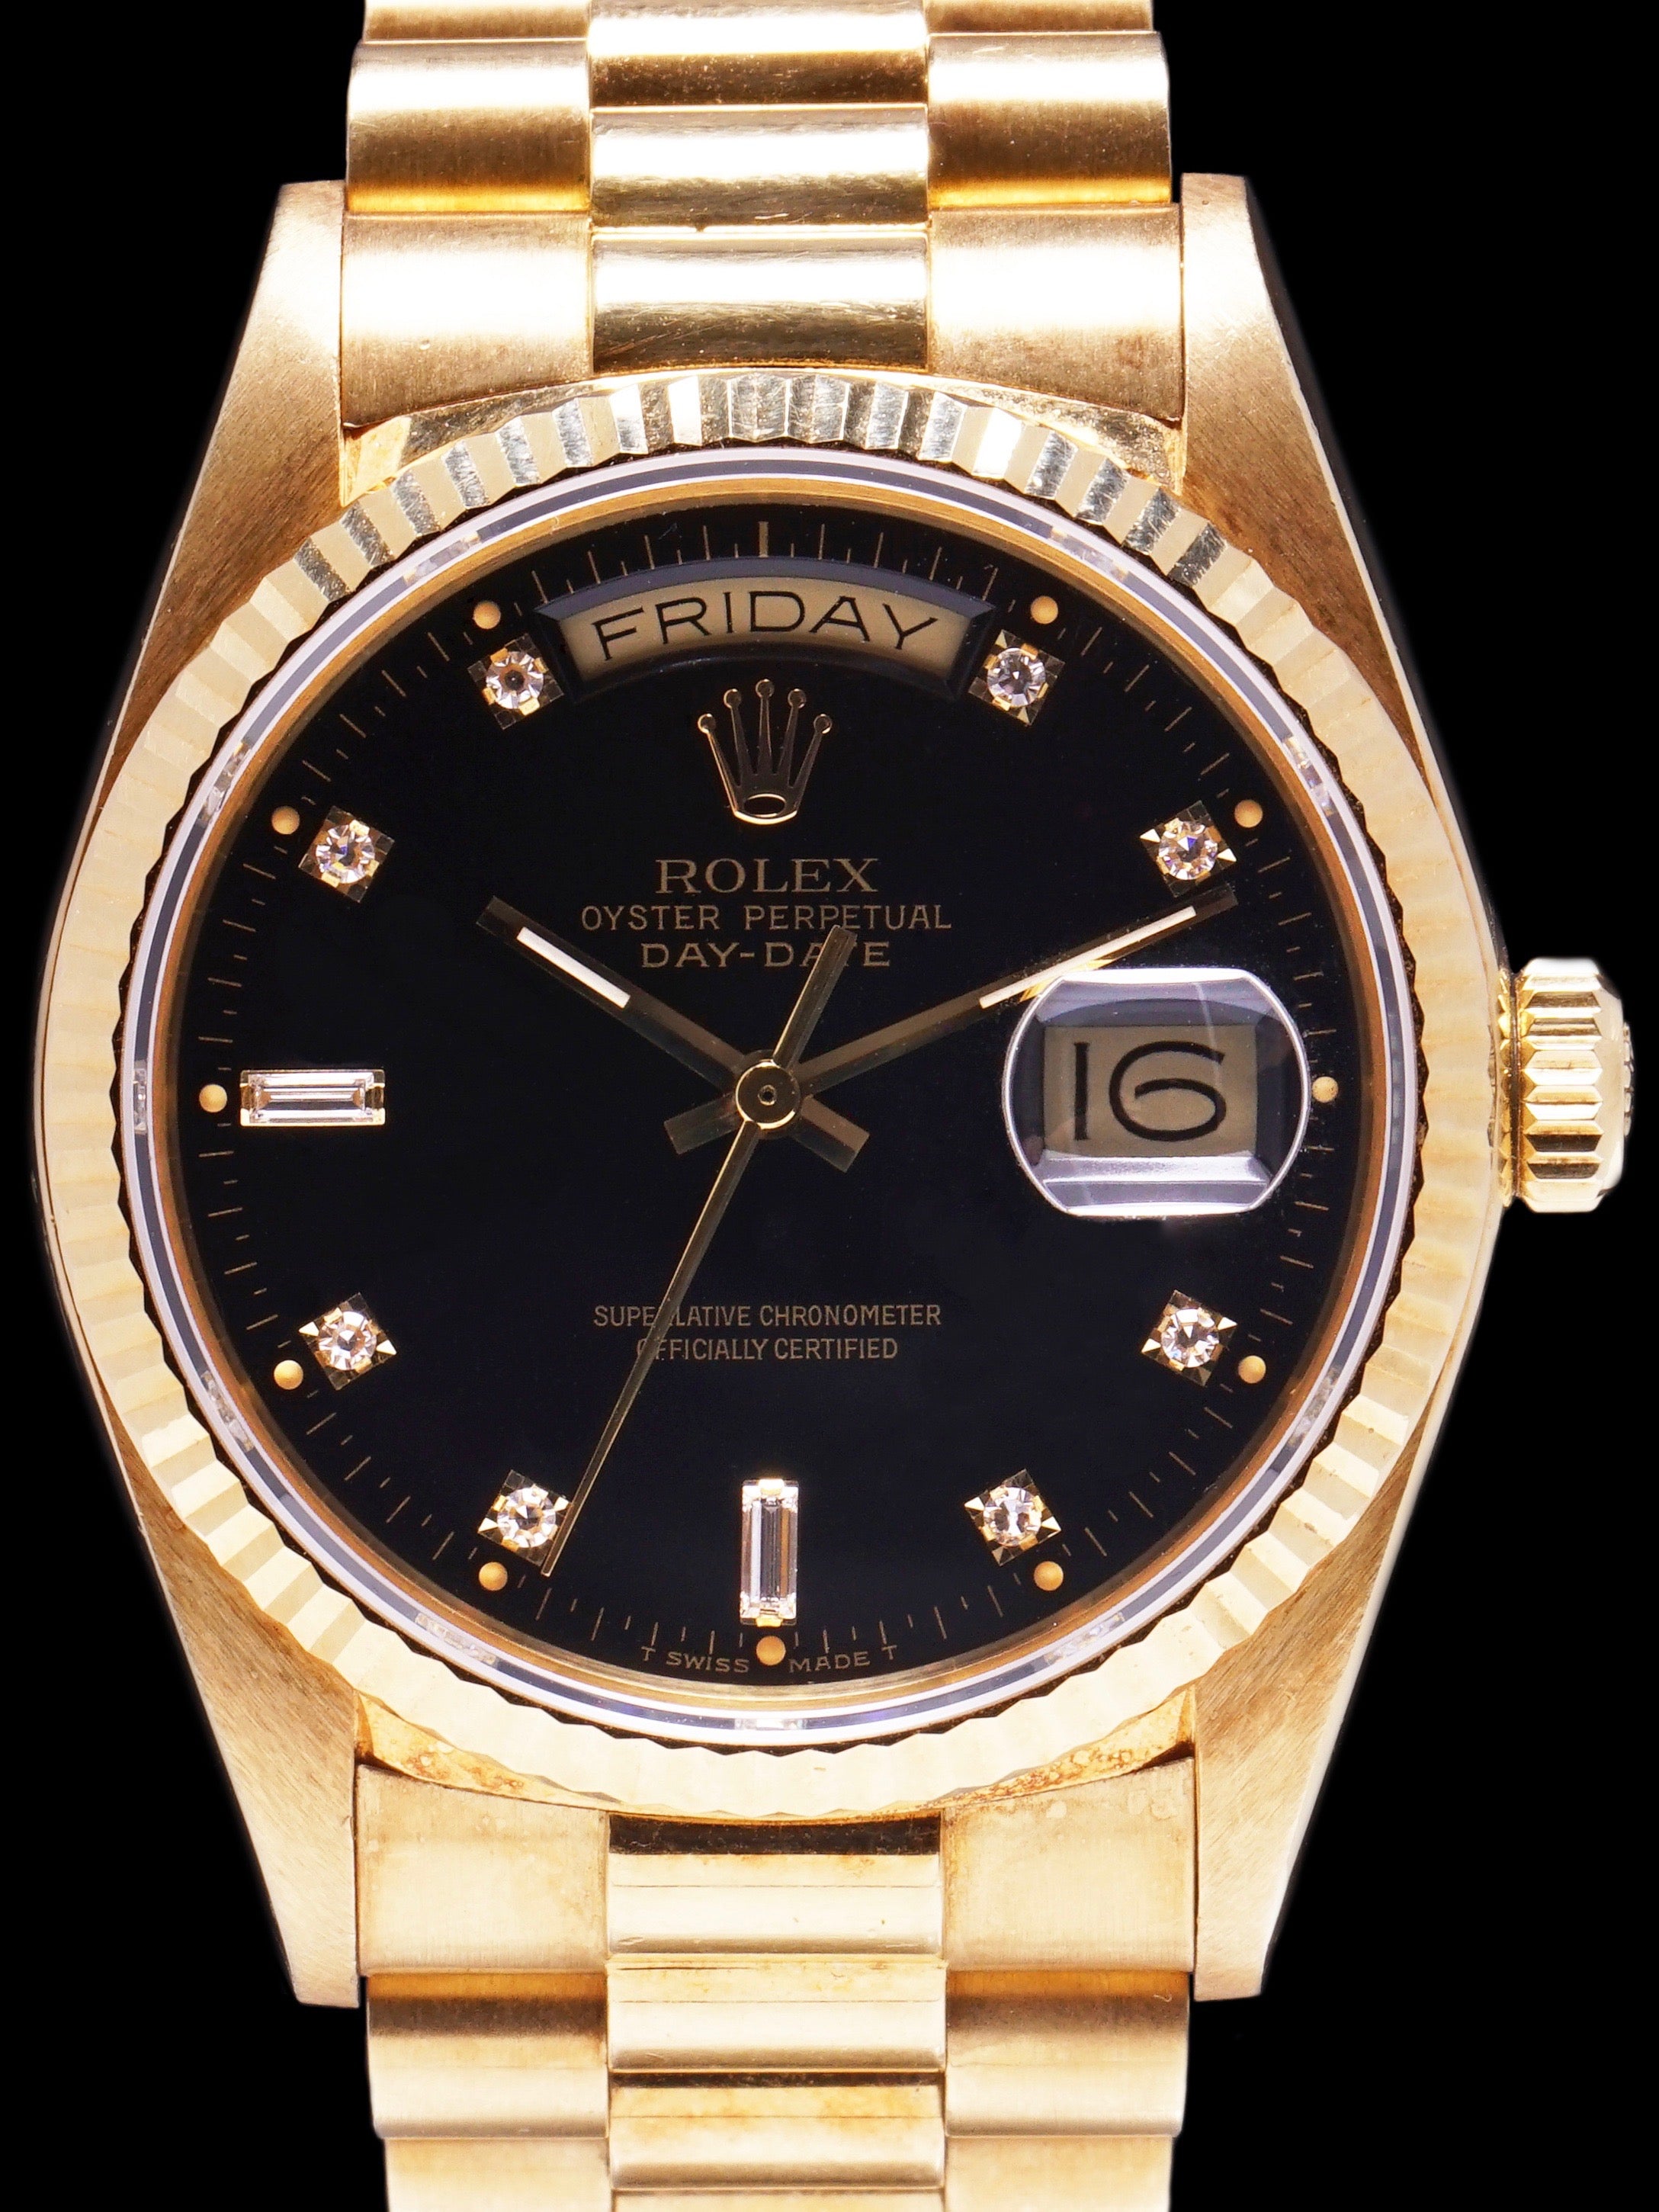 **Unpolished** 1987 Rolex Day-Date (Ref. 18038) Black Factory Diamond Dial With Box and Booklets